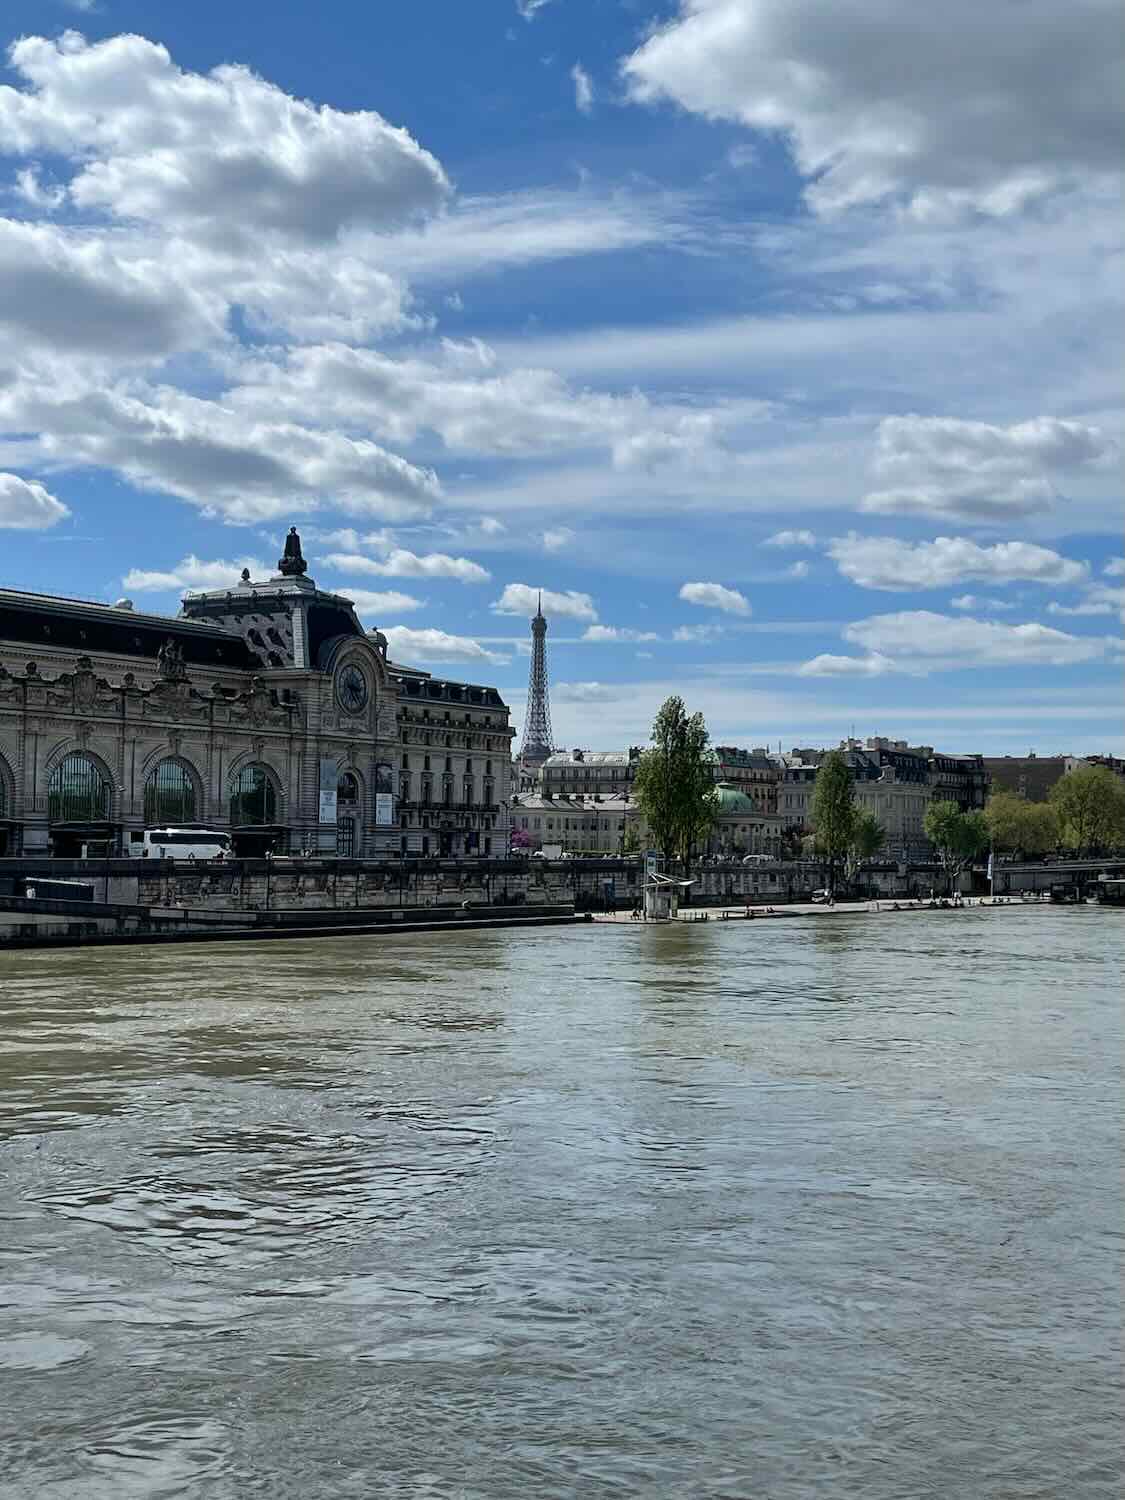 A clear day view of the Seine River with the Musée d'Orsay on one bank and the Eiffel Tower in the far background, showcasing Paris's iconic architecture and waterways.